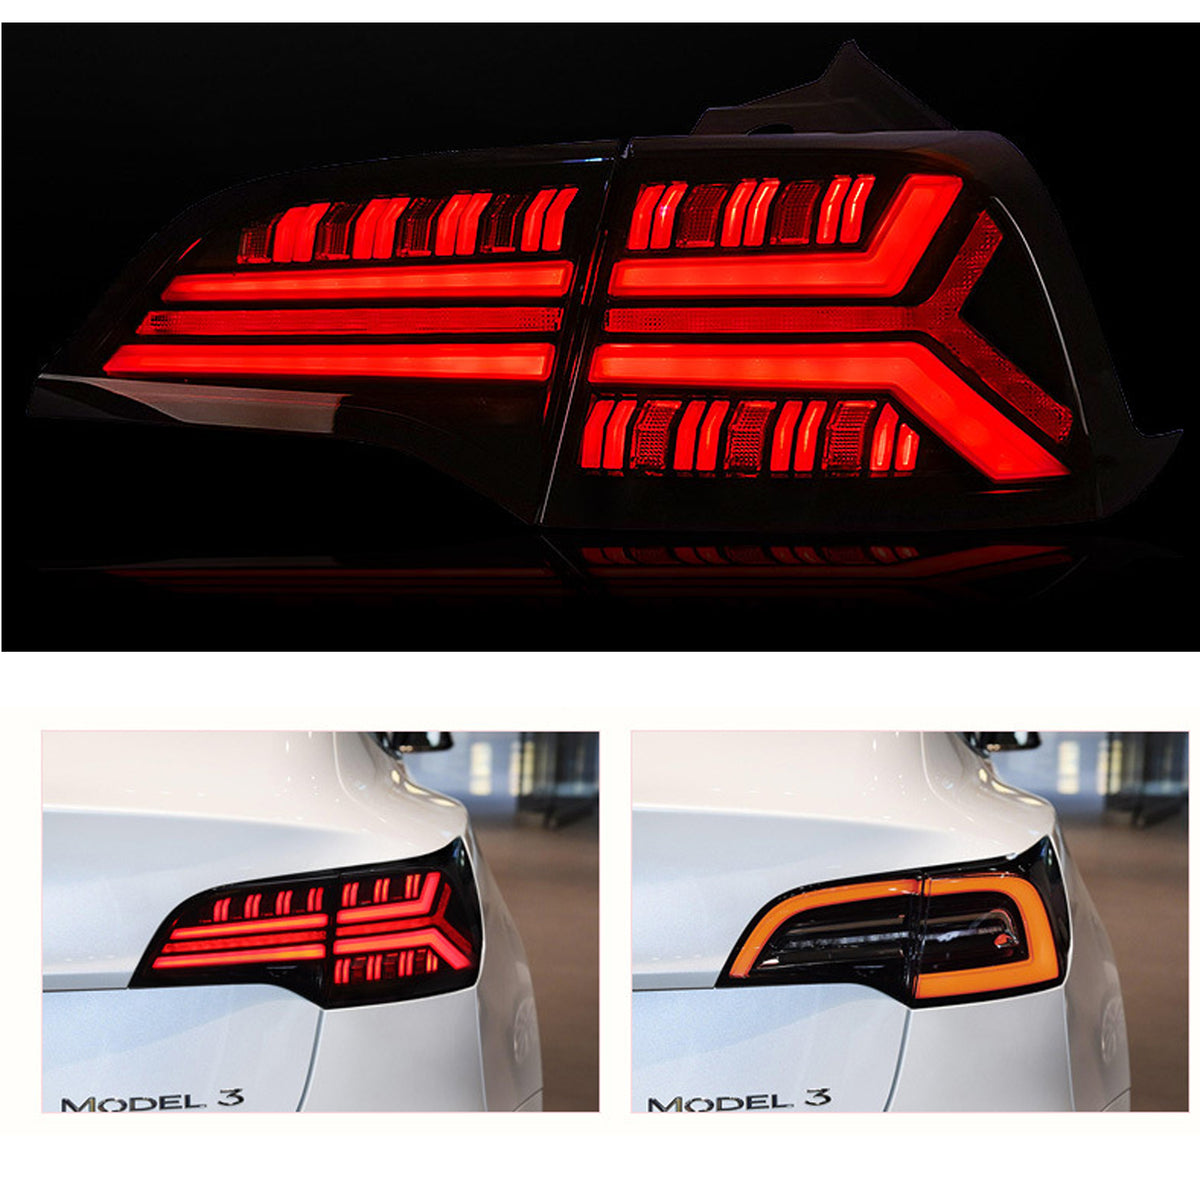 Turoaz LED Tail Light Assembly for Tesla Model 3 Y 2021+, Streamlined LED Sequential Turn Lights with Dynamic Startup Back Rear Lamps, Reverse Lights Accessories (fish bone)